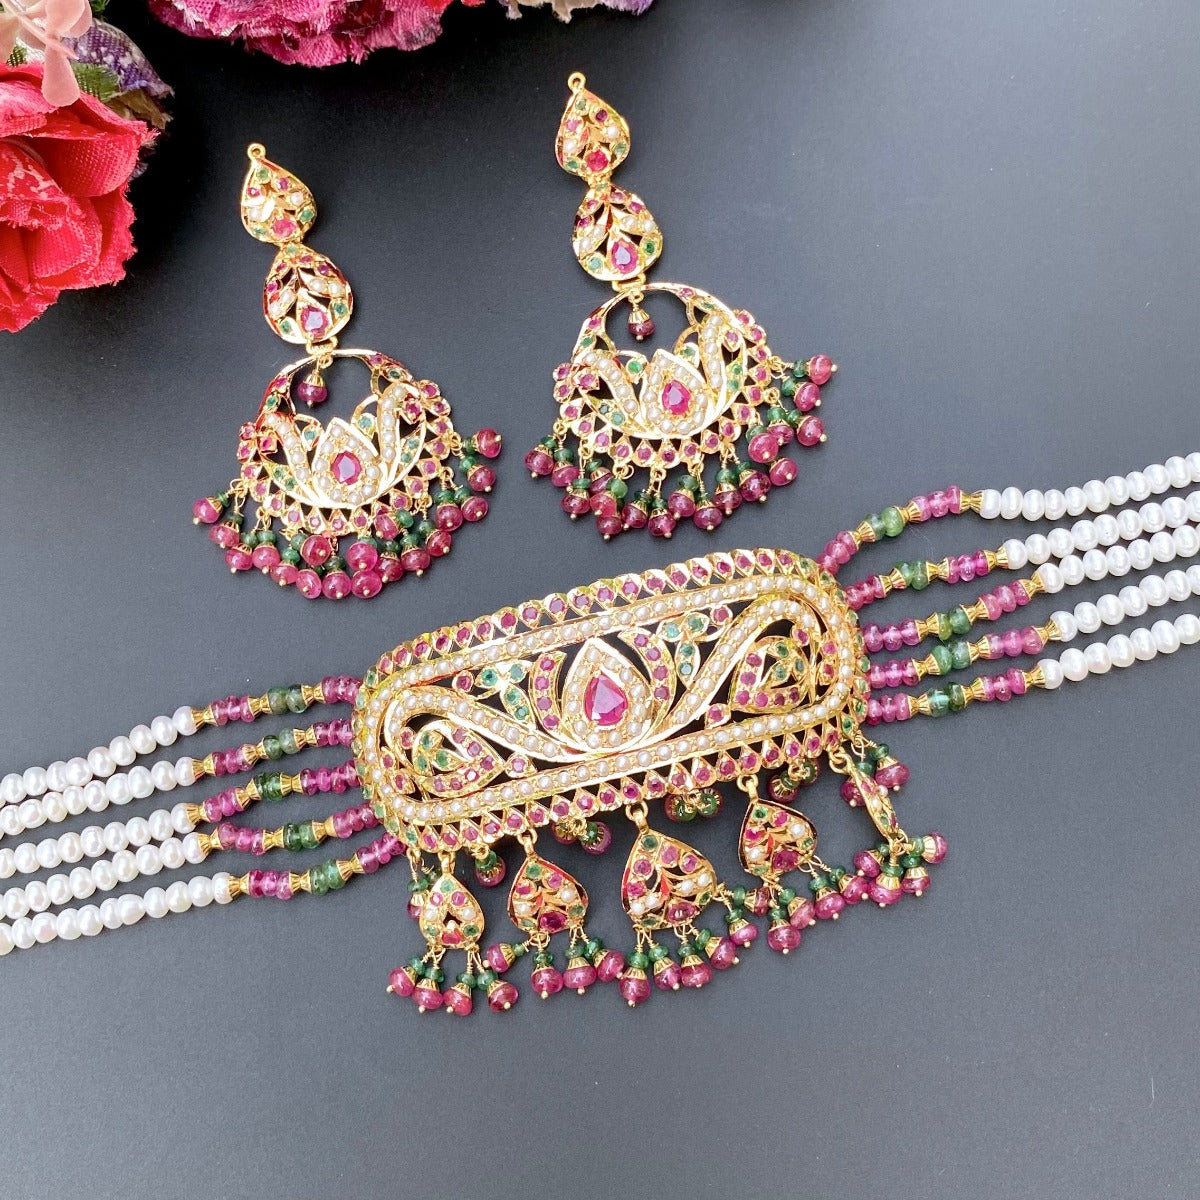 rajasthani aad necklace set in real 22k gold